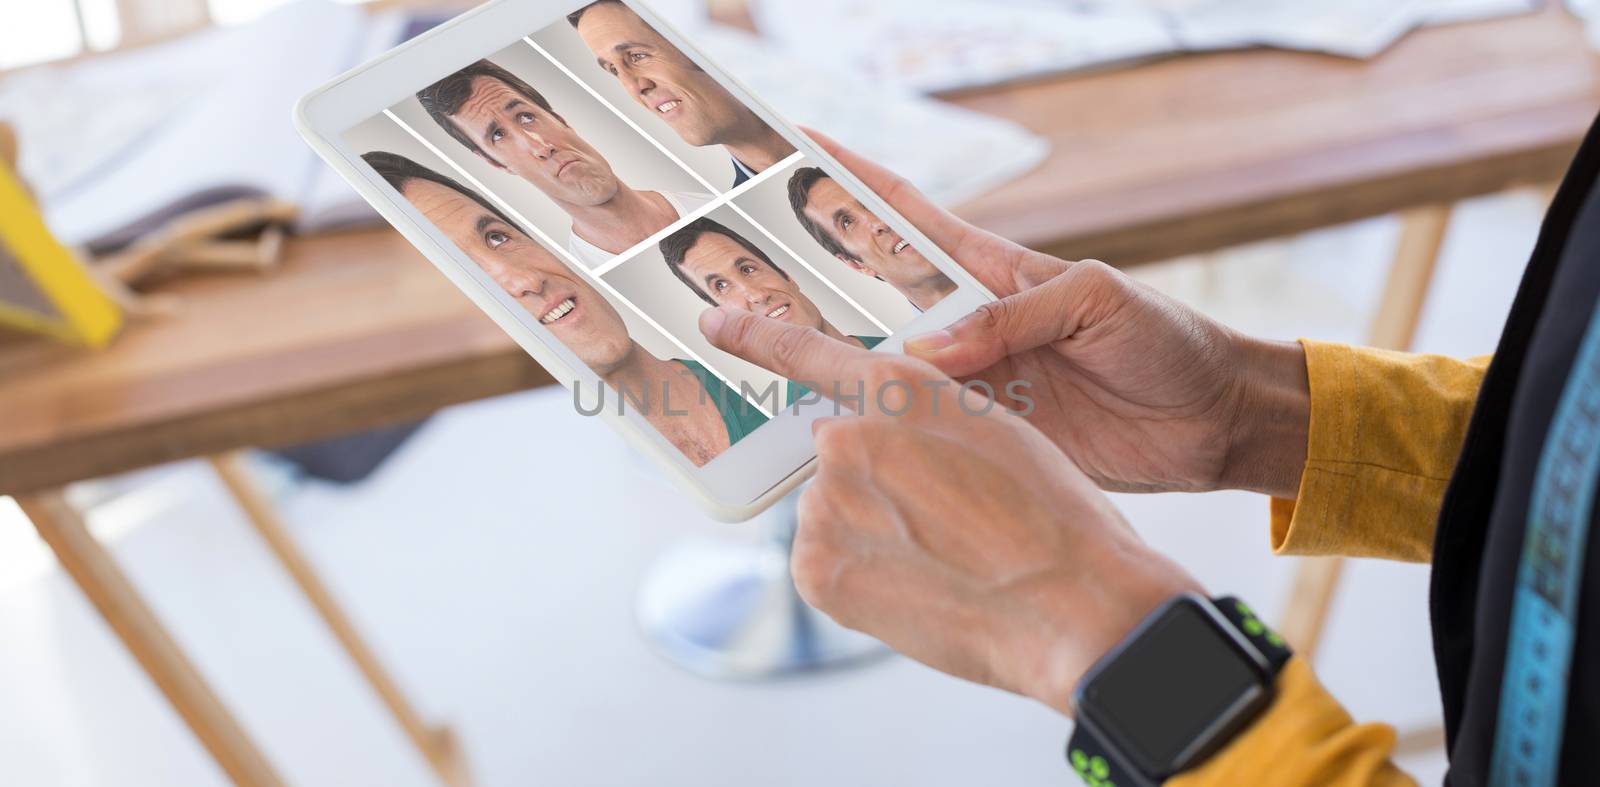 People collage portrait single 5 against fashion designer using digital tablet in office